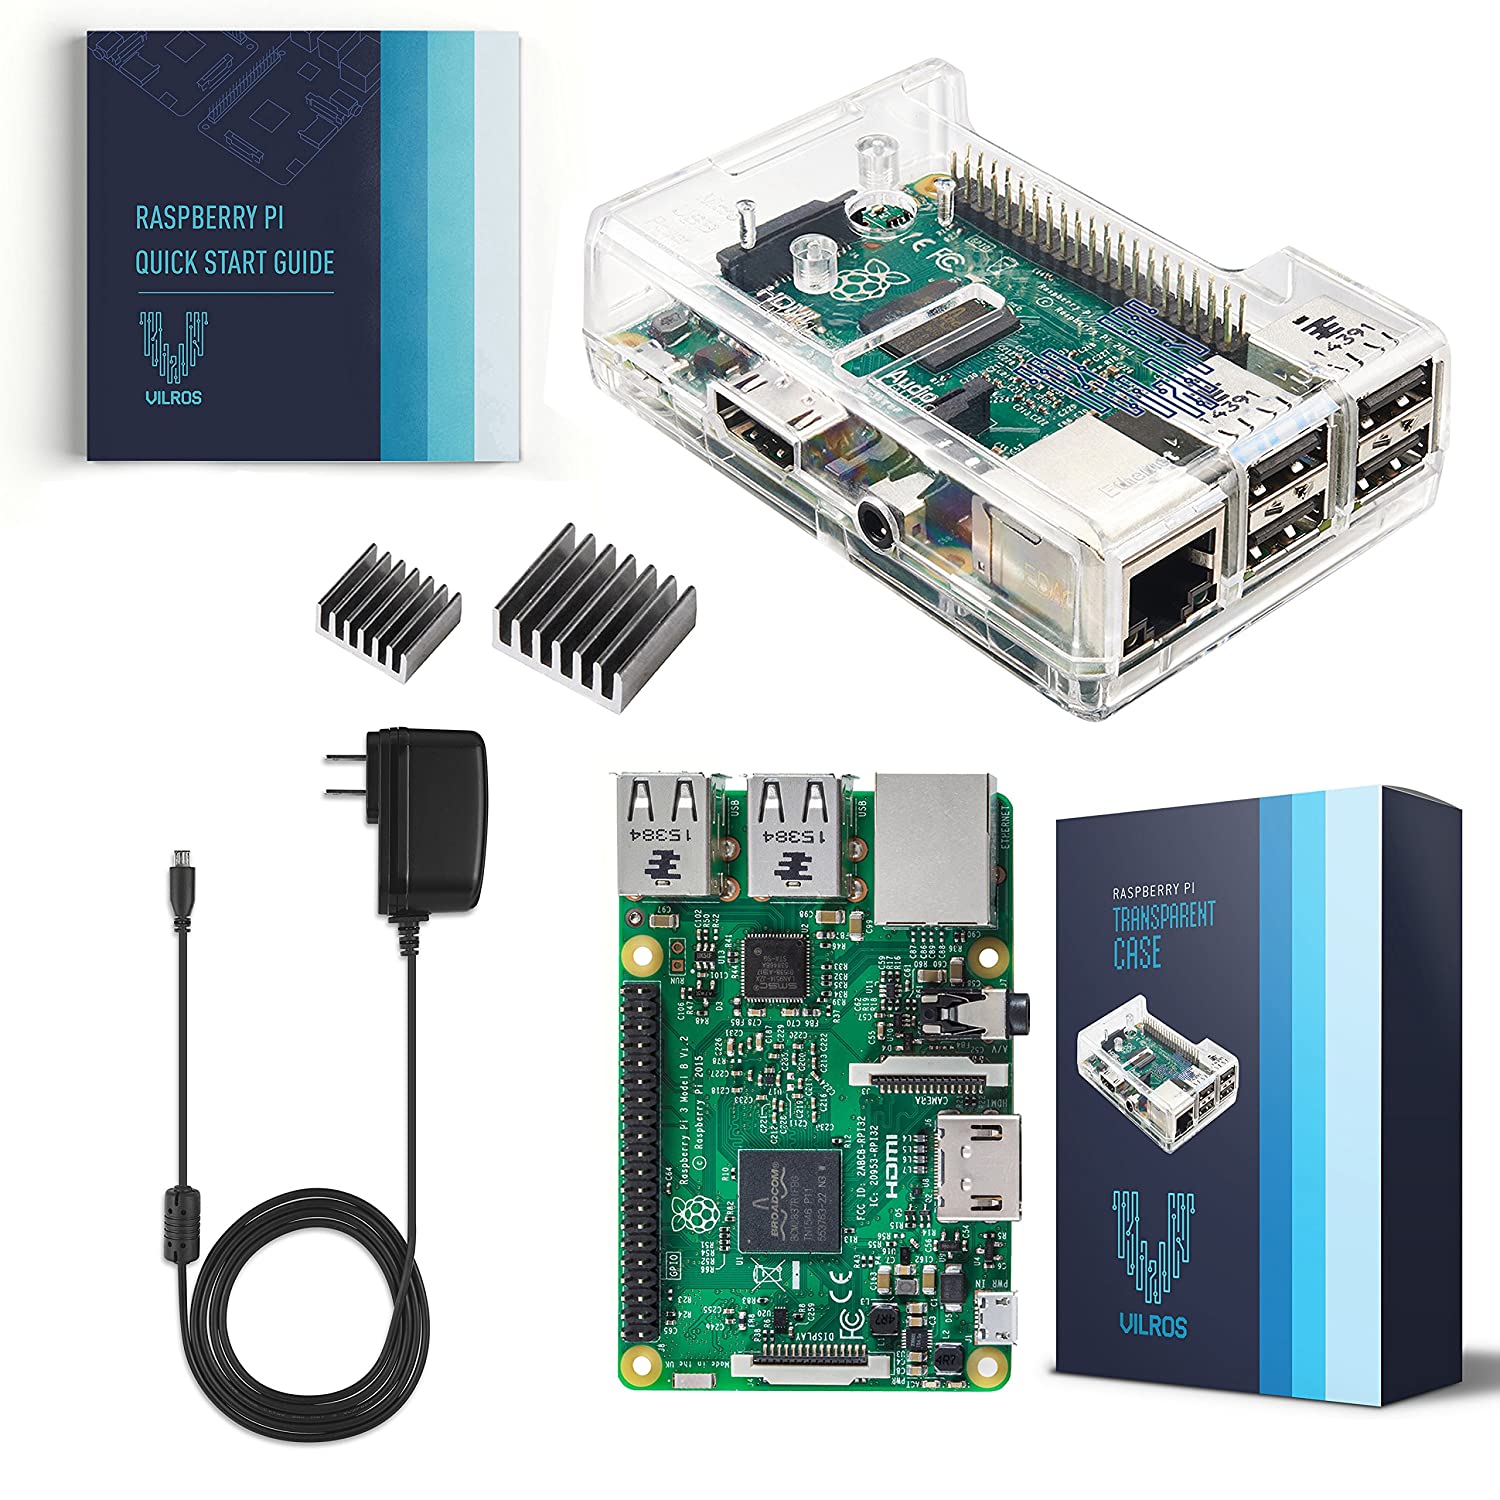 Buy Vilros Raspberry Pi 3 Kit with Clear Case and 2.5A Power Supply